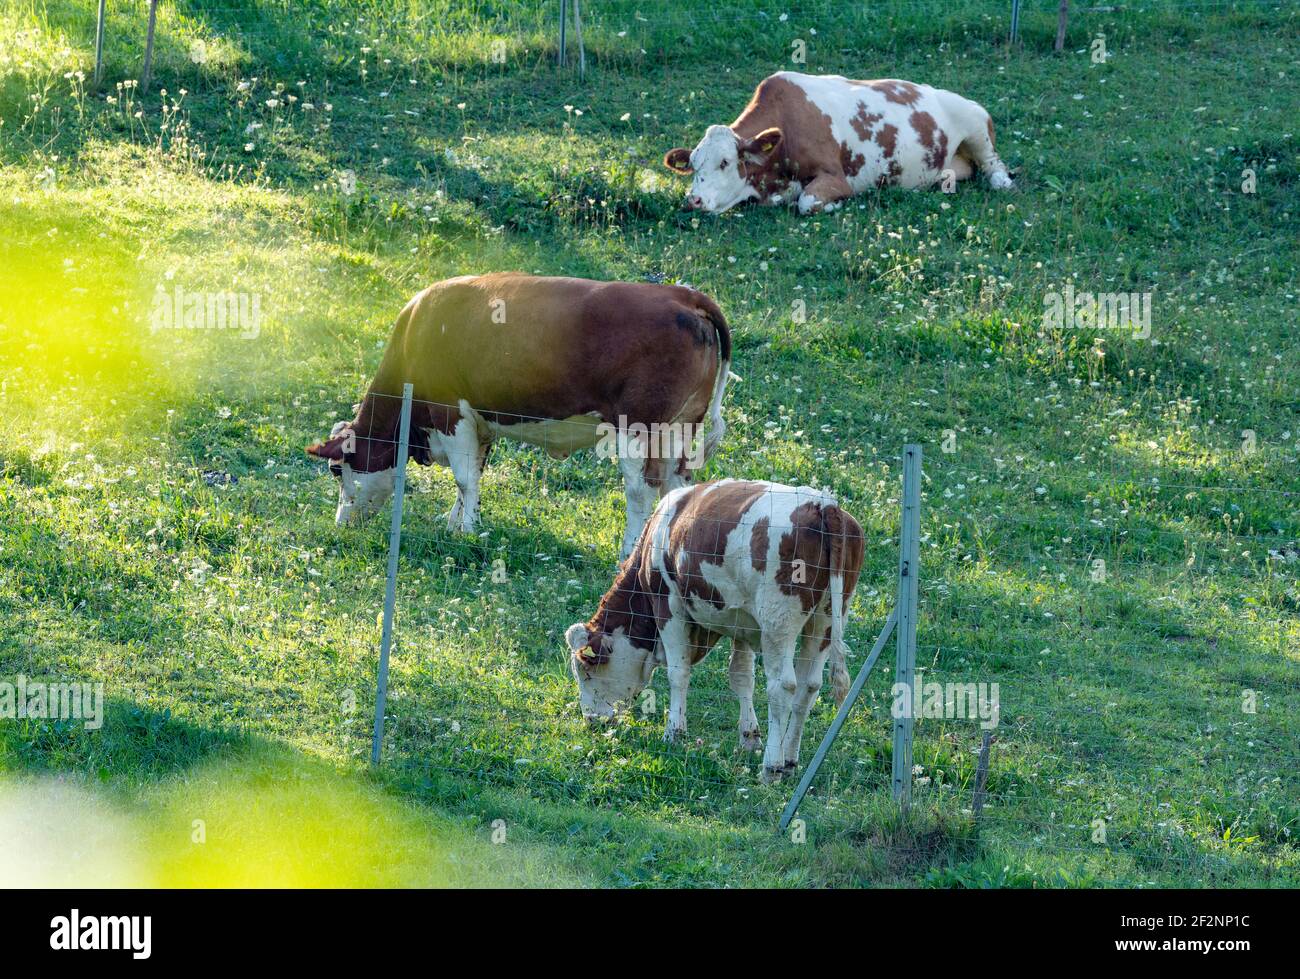 Cows, calves, Simmental cattle, young animals, alpine pastures, pastures, blooming meadows, evening sun Stock Photo